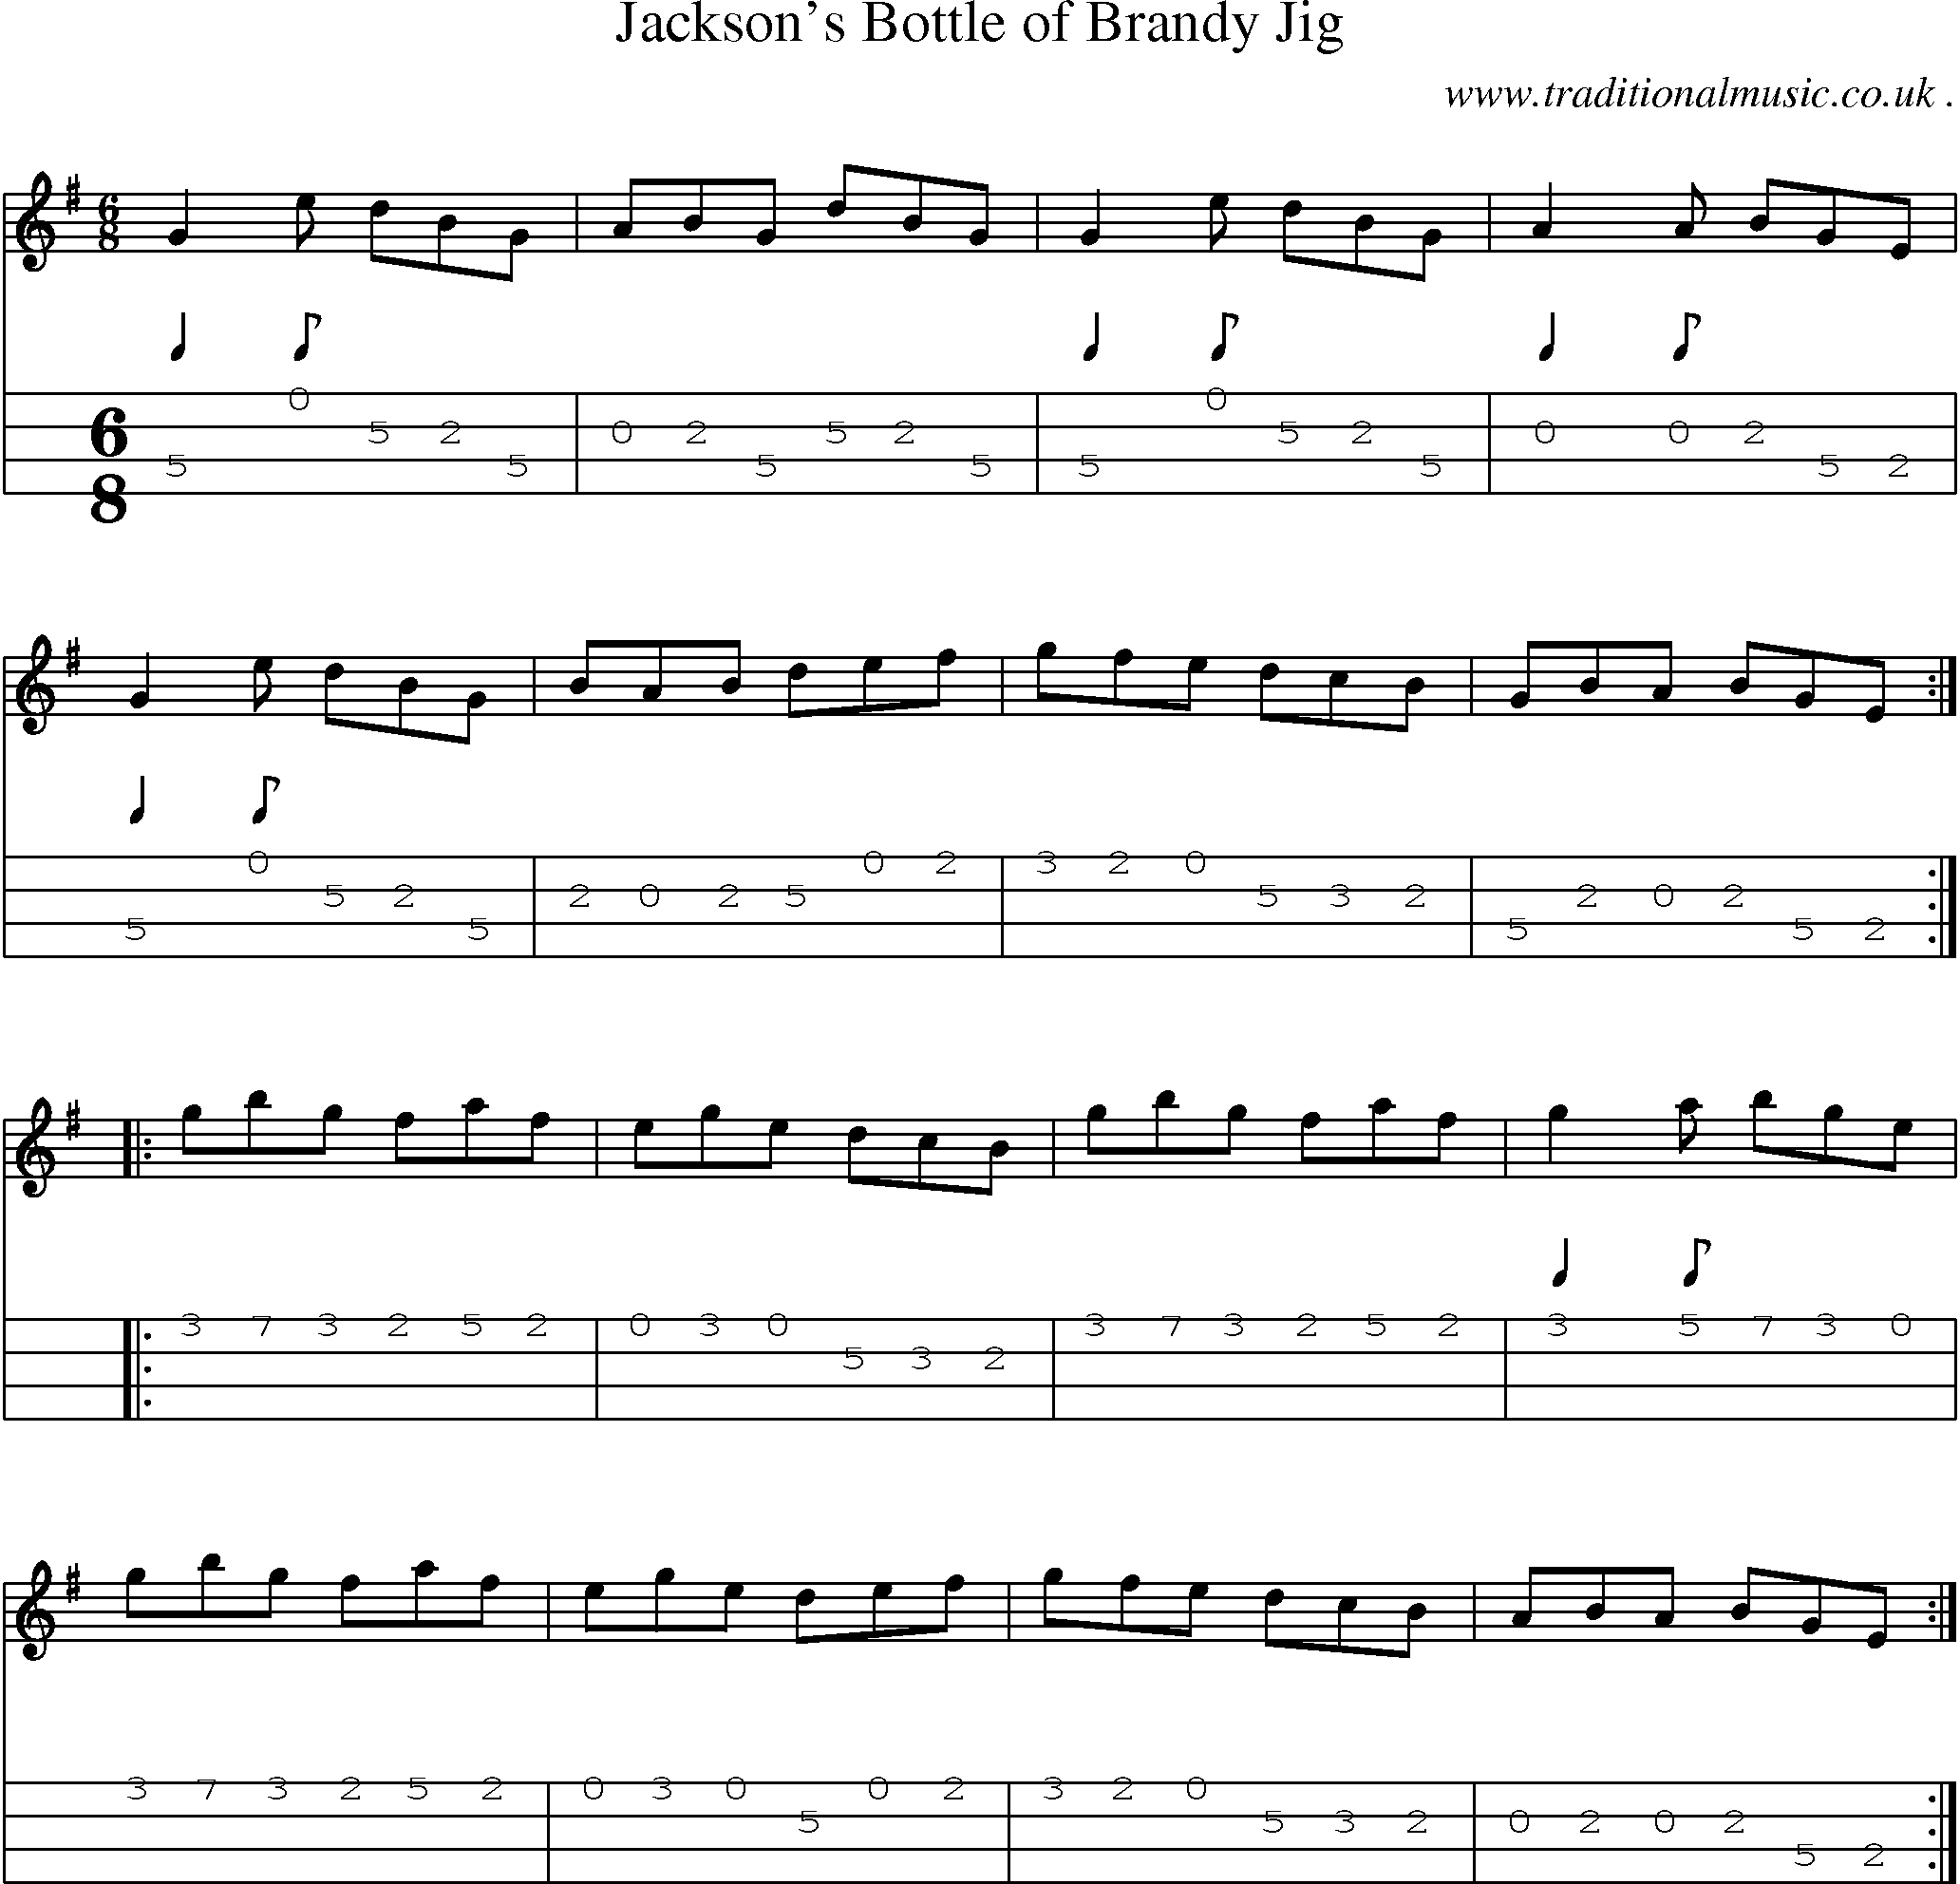 Sheet-Music and Mandolin Tabs for Jacksons Bottle Of Brandy Jig